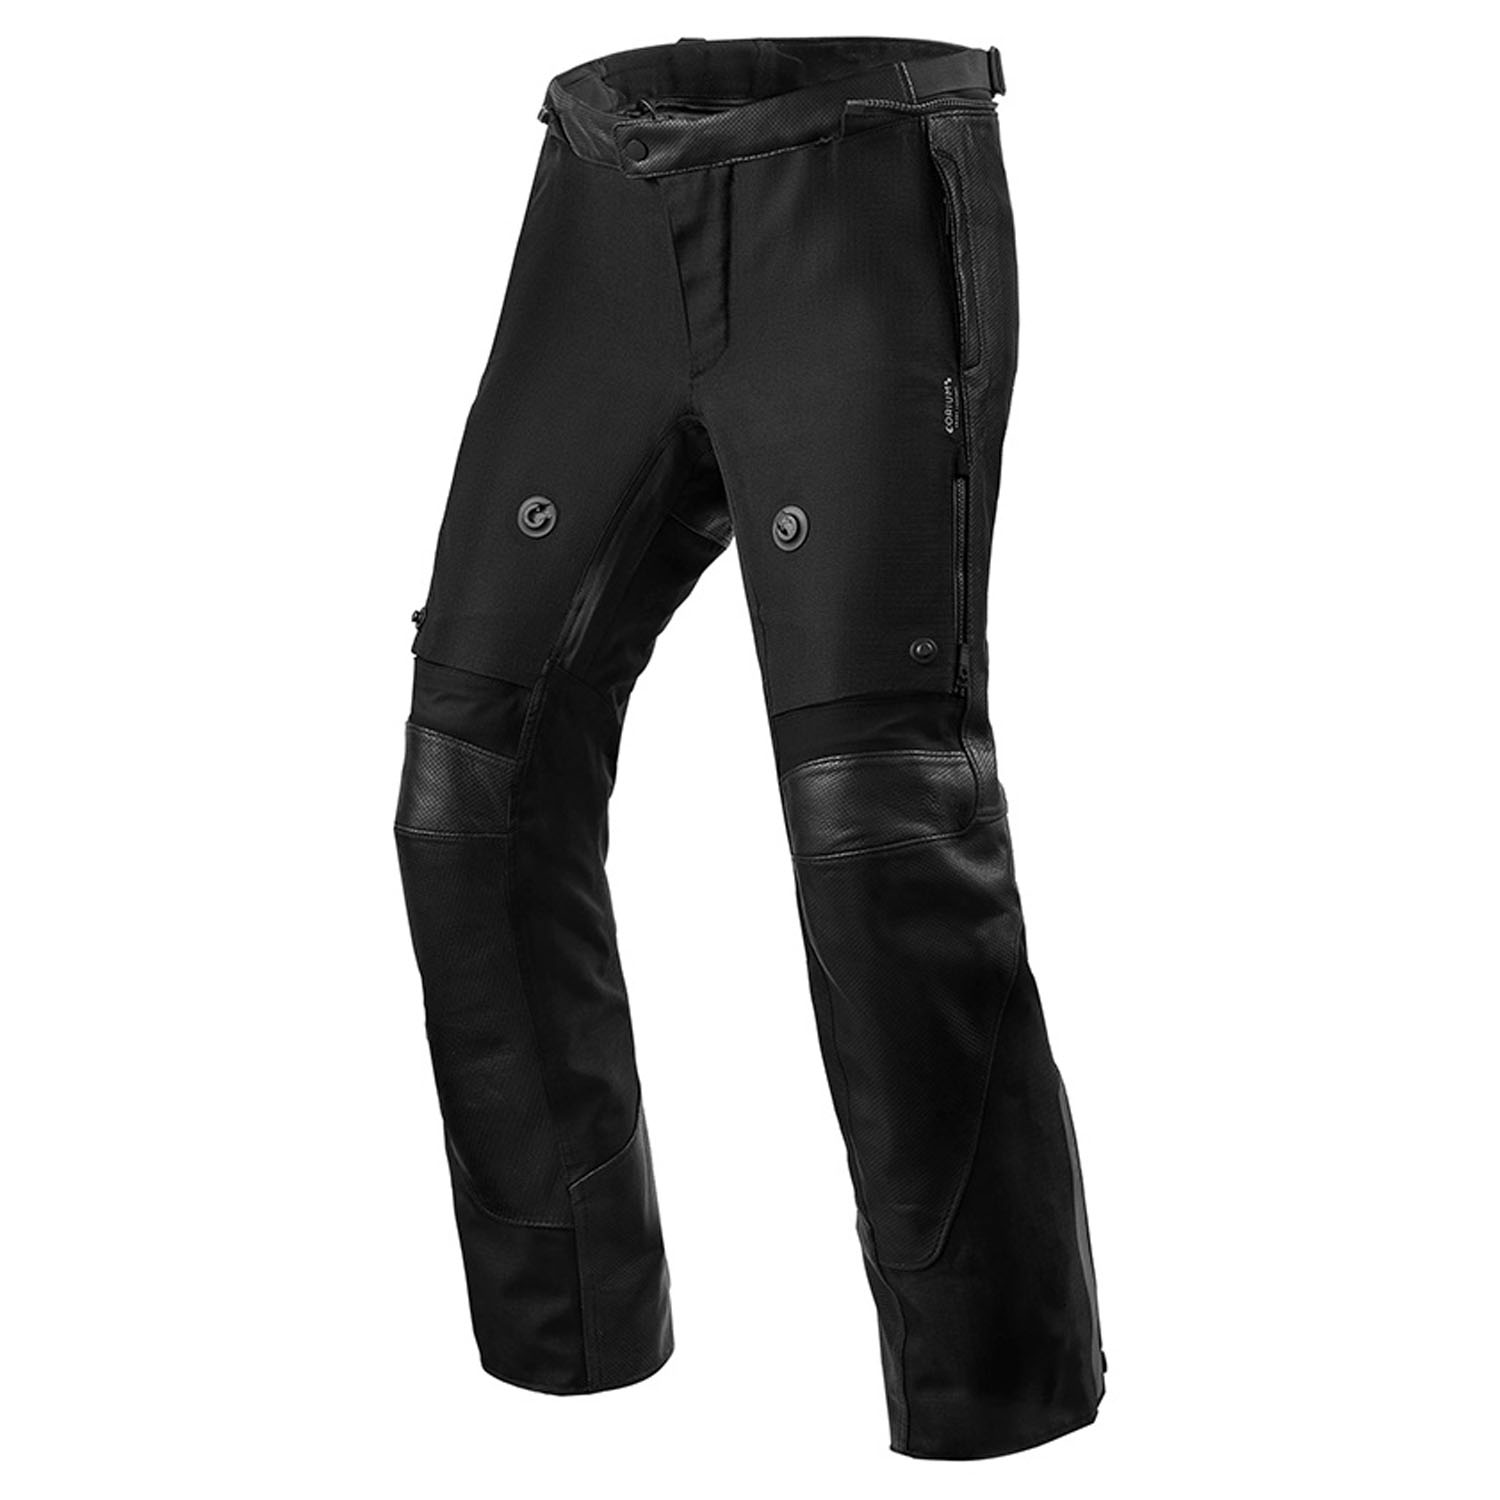 Image of REV'IT! Trousers Valve H2O Black Short Motorcycle Pants Size 56 ID 8700001315883